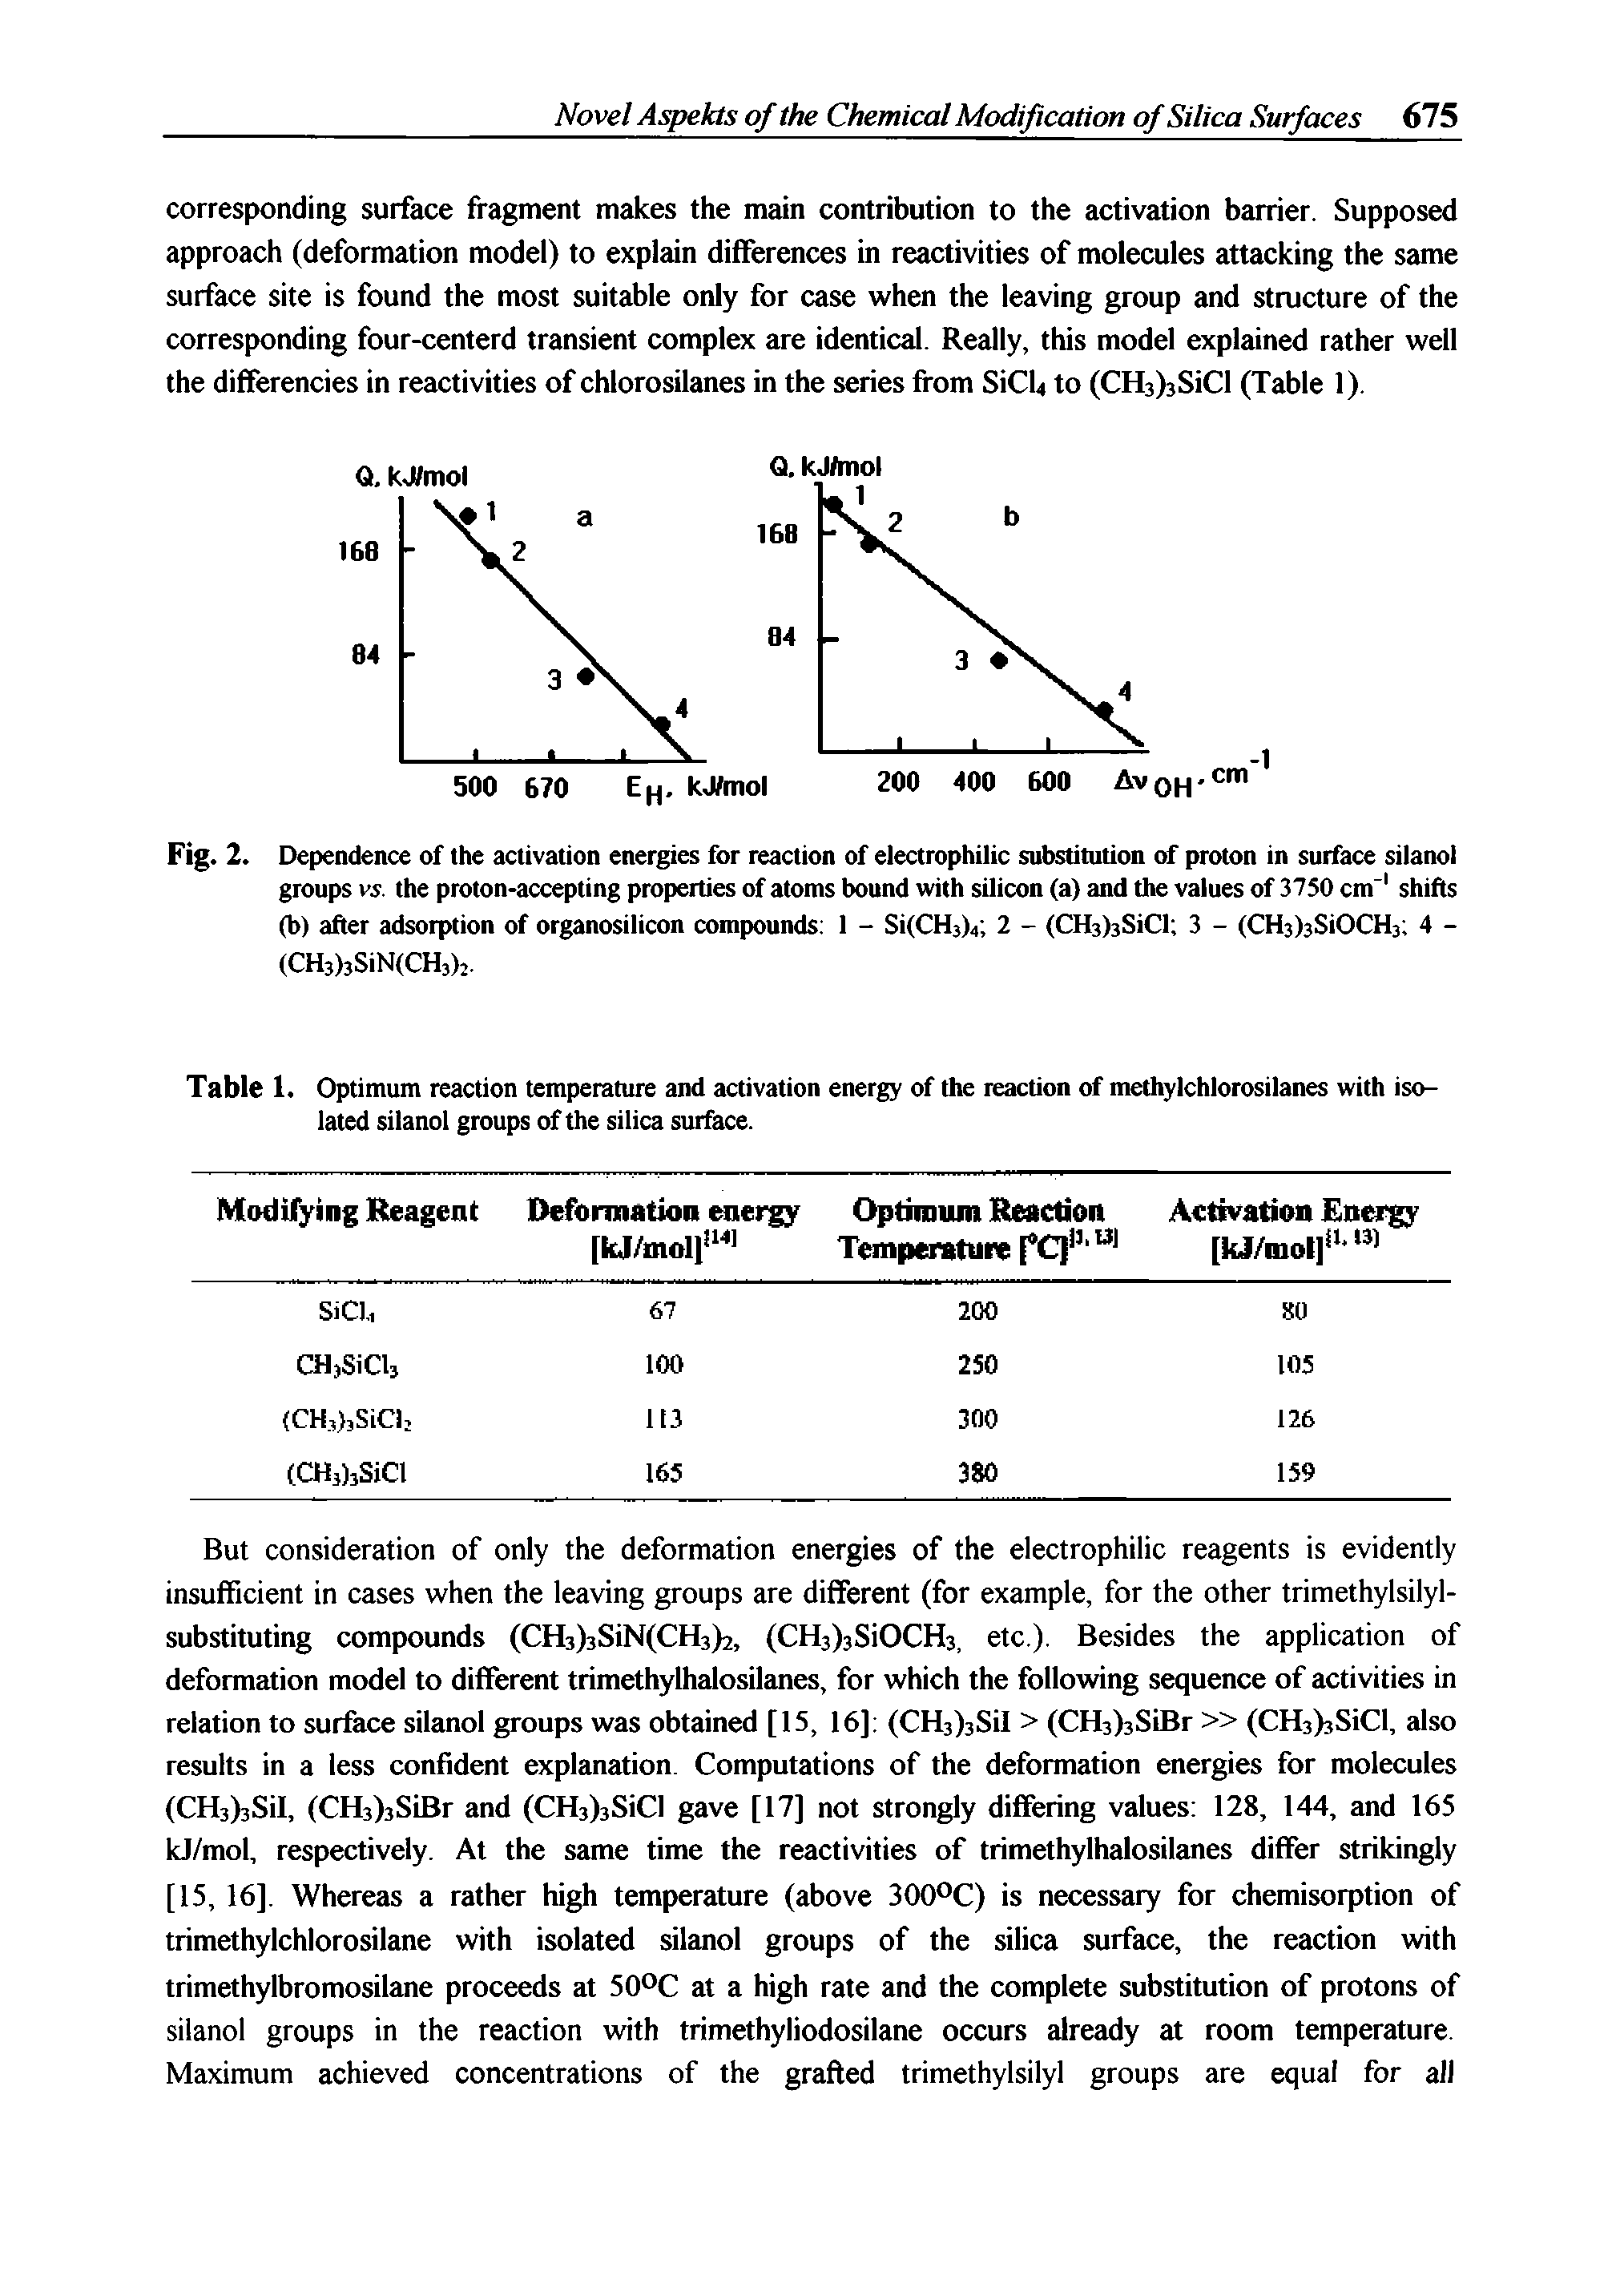 Fig. 2. Dependence of the activation energies for reaction of electrophilic substitution of proton in surface silanol groups vs. the proton-accepting properties of atoms bound with silicon (a) and the values of 3750 cm" shifts (b) after adsorption of organosilicon compounds 1 - SitCHj) 2 - (CH3)3SiCl 3 - (CH3>3SiOCH3 4 -(CH3)3SiN(CH3)j.